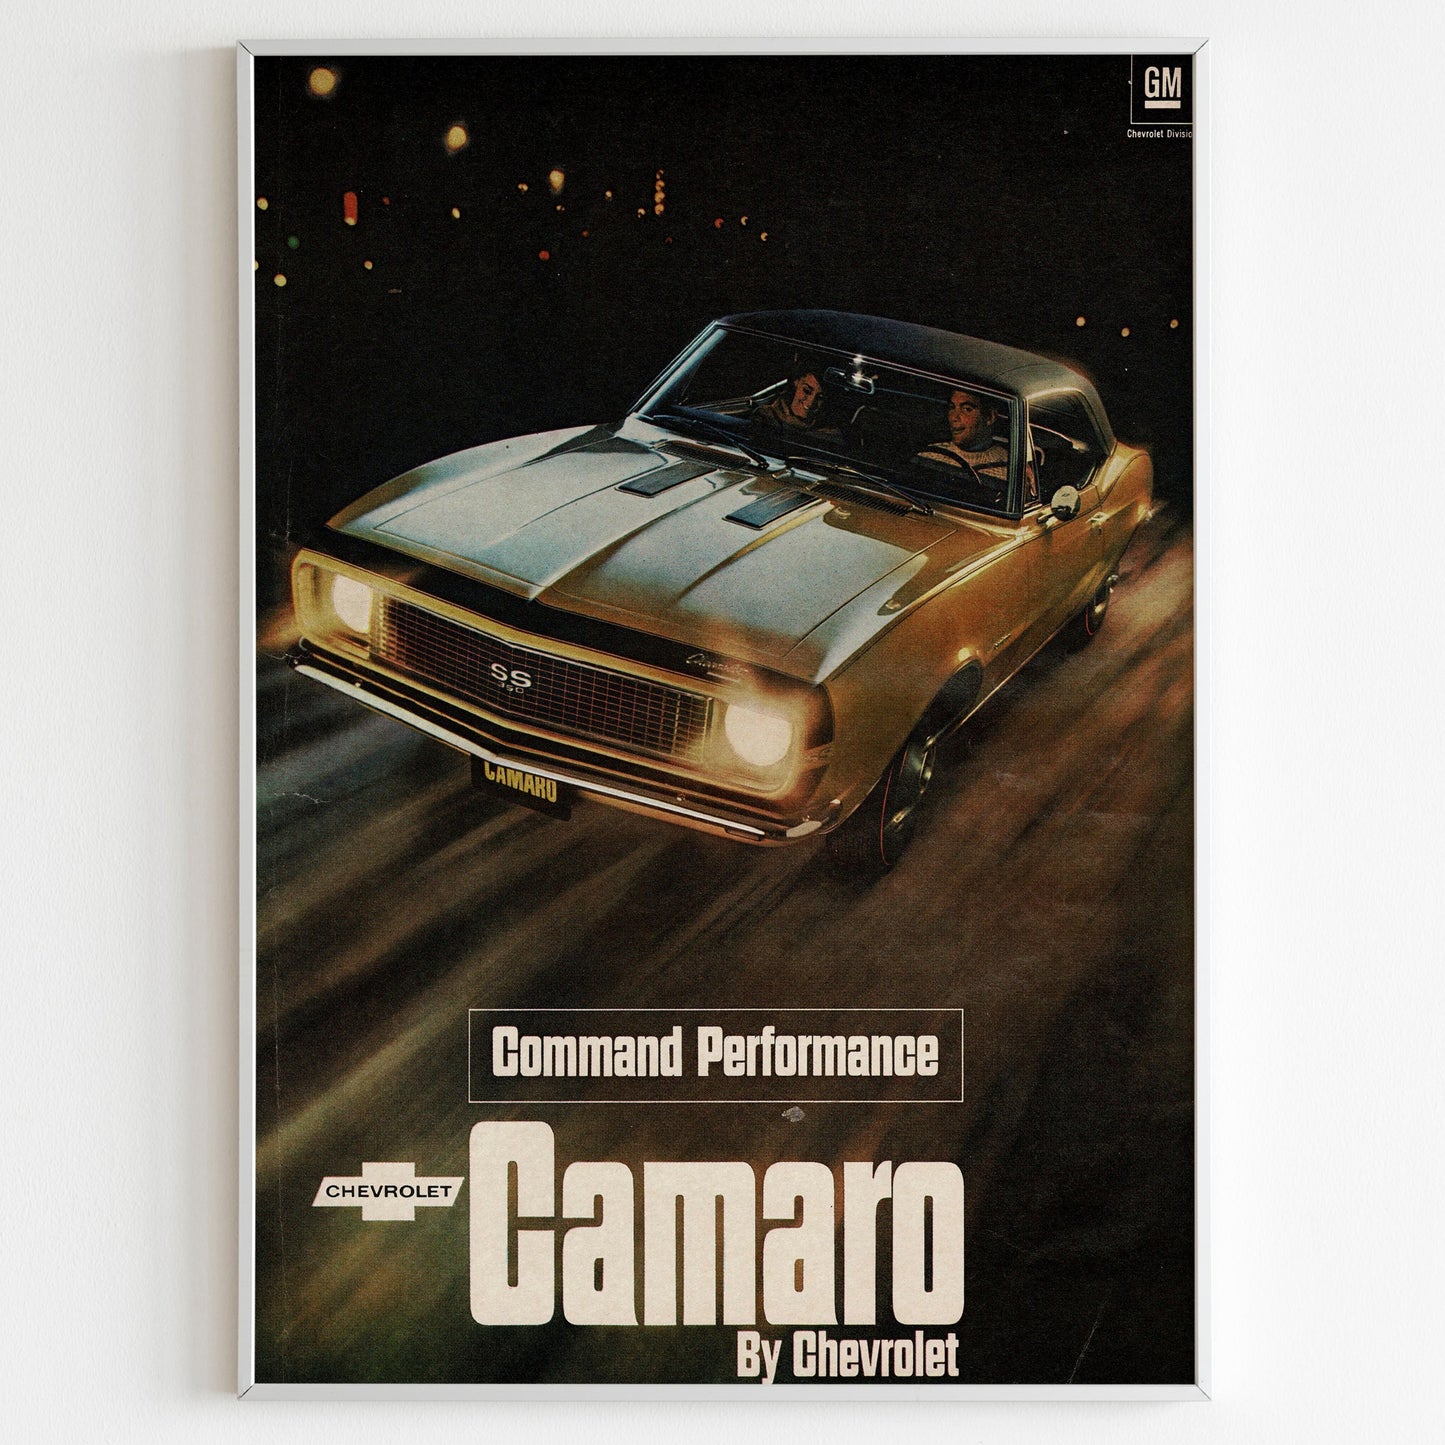 Chevrolet Camaro Advertising Poster, Muscle Car 80s Style Print, Vintage Design, Racing Ad Wall Art, Magazine Retro Advertisement